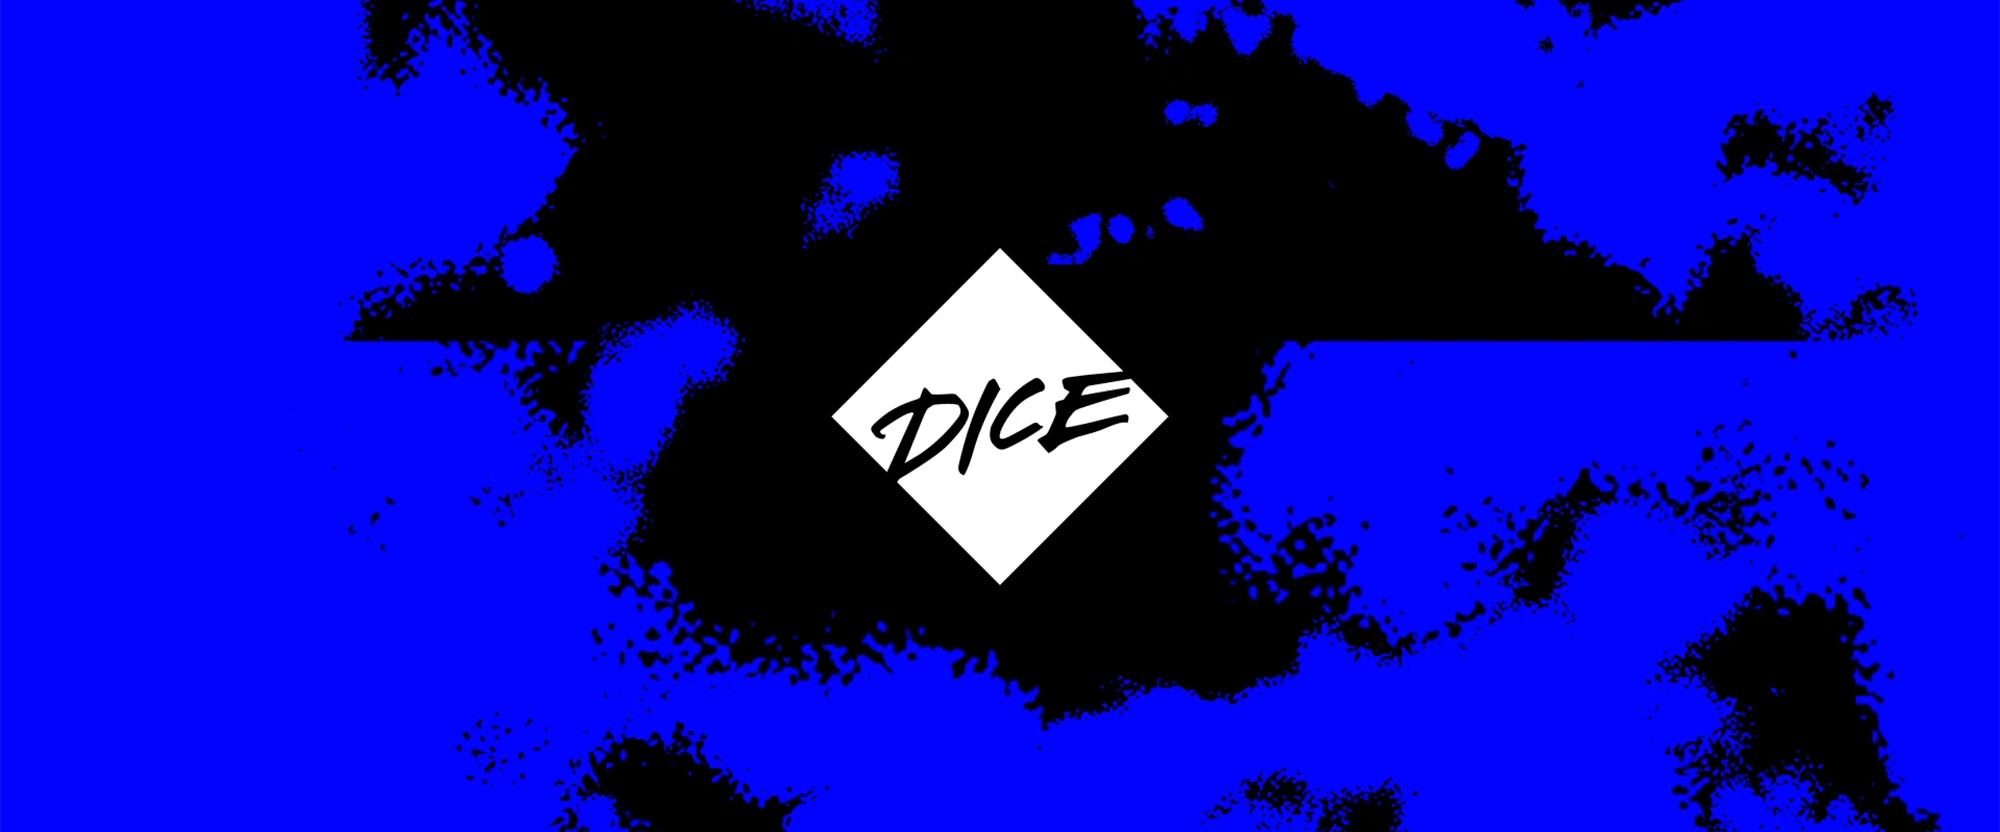 New Identity for DICE done In-house